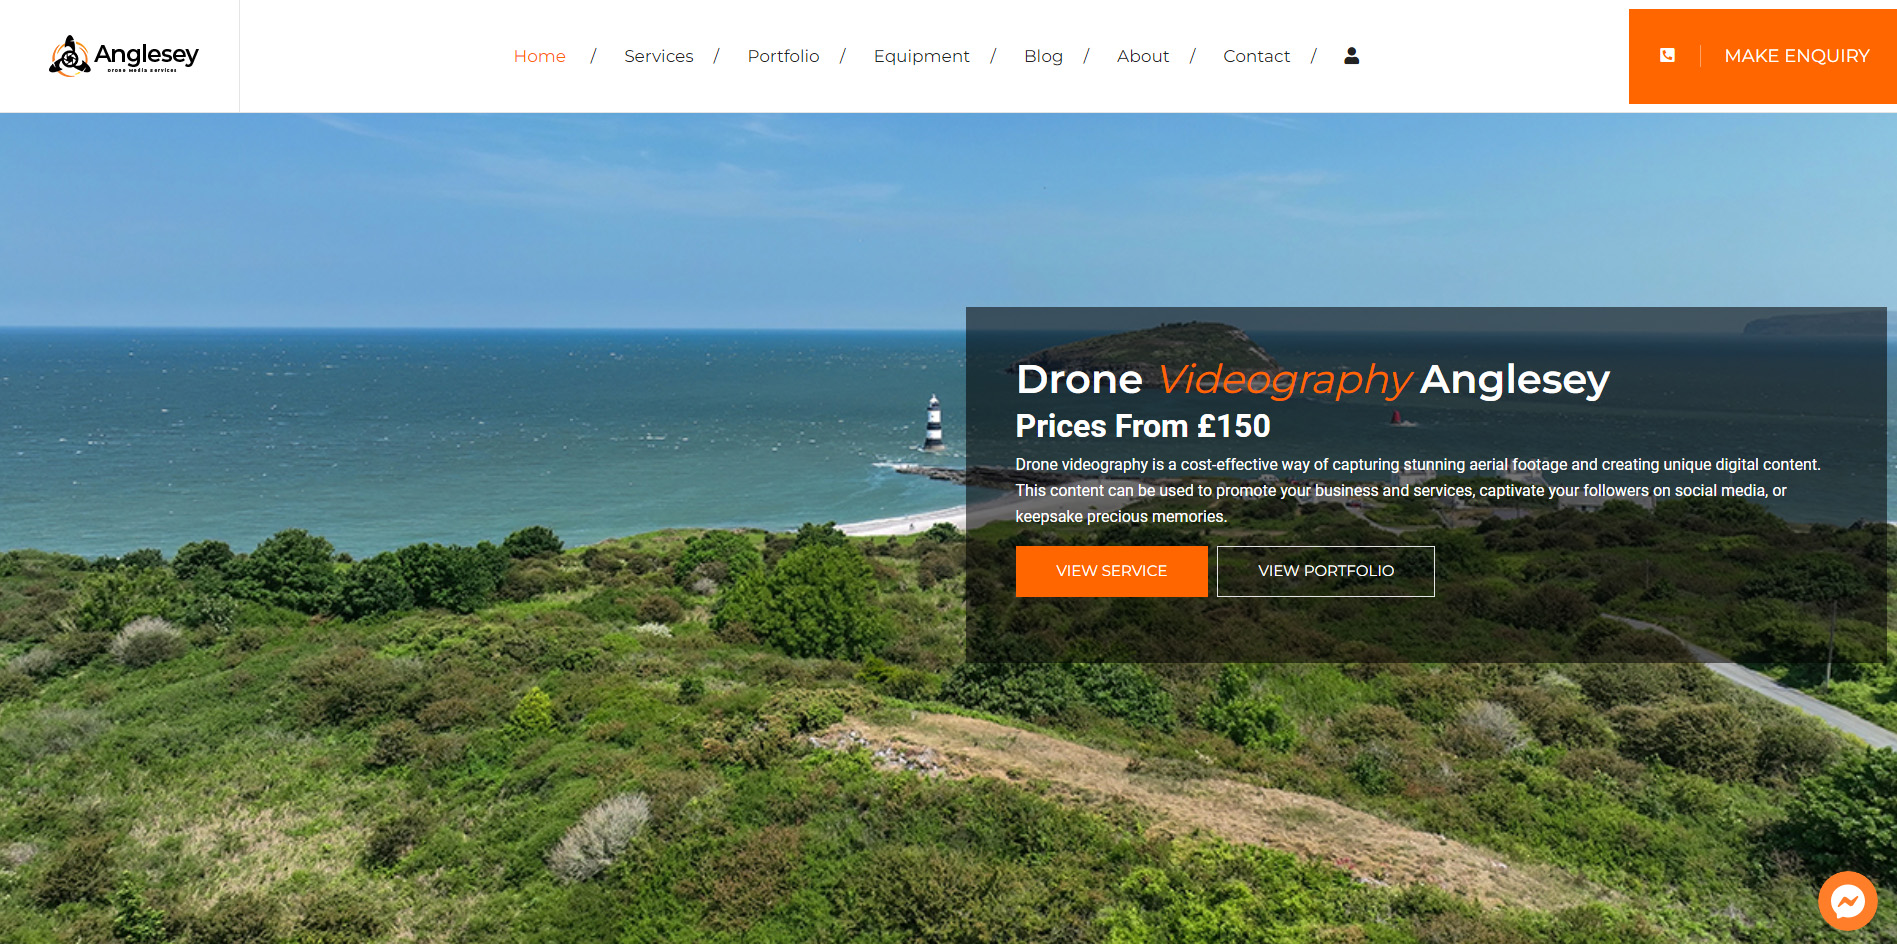 Anglesey Drone Media Services image 2